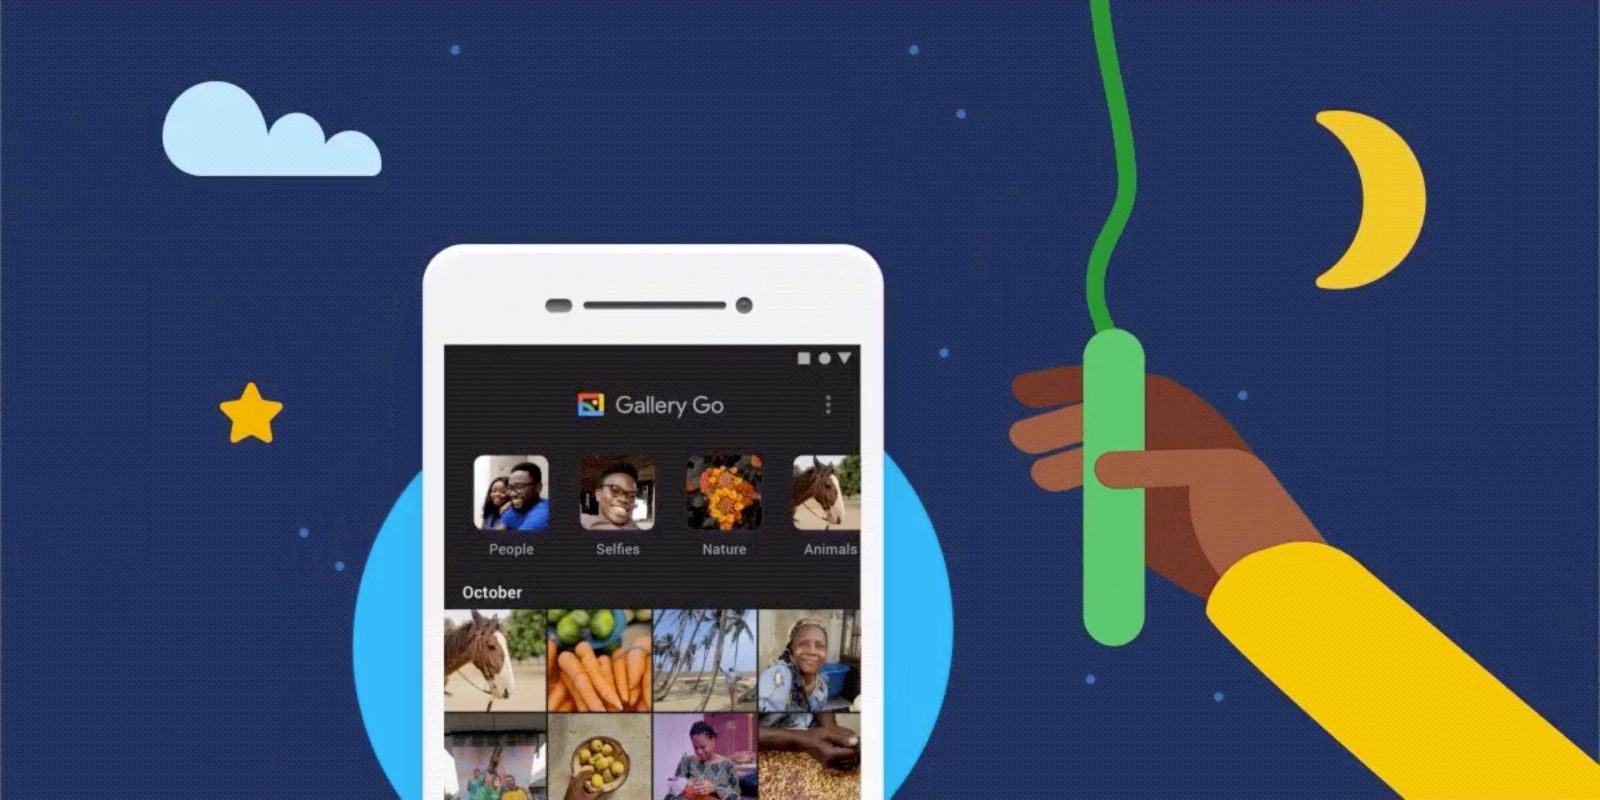 Gallery Go from Google